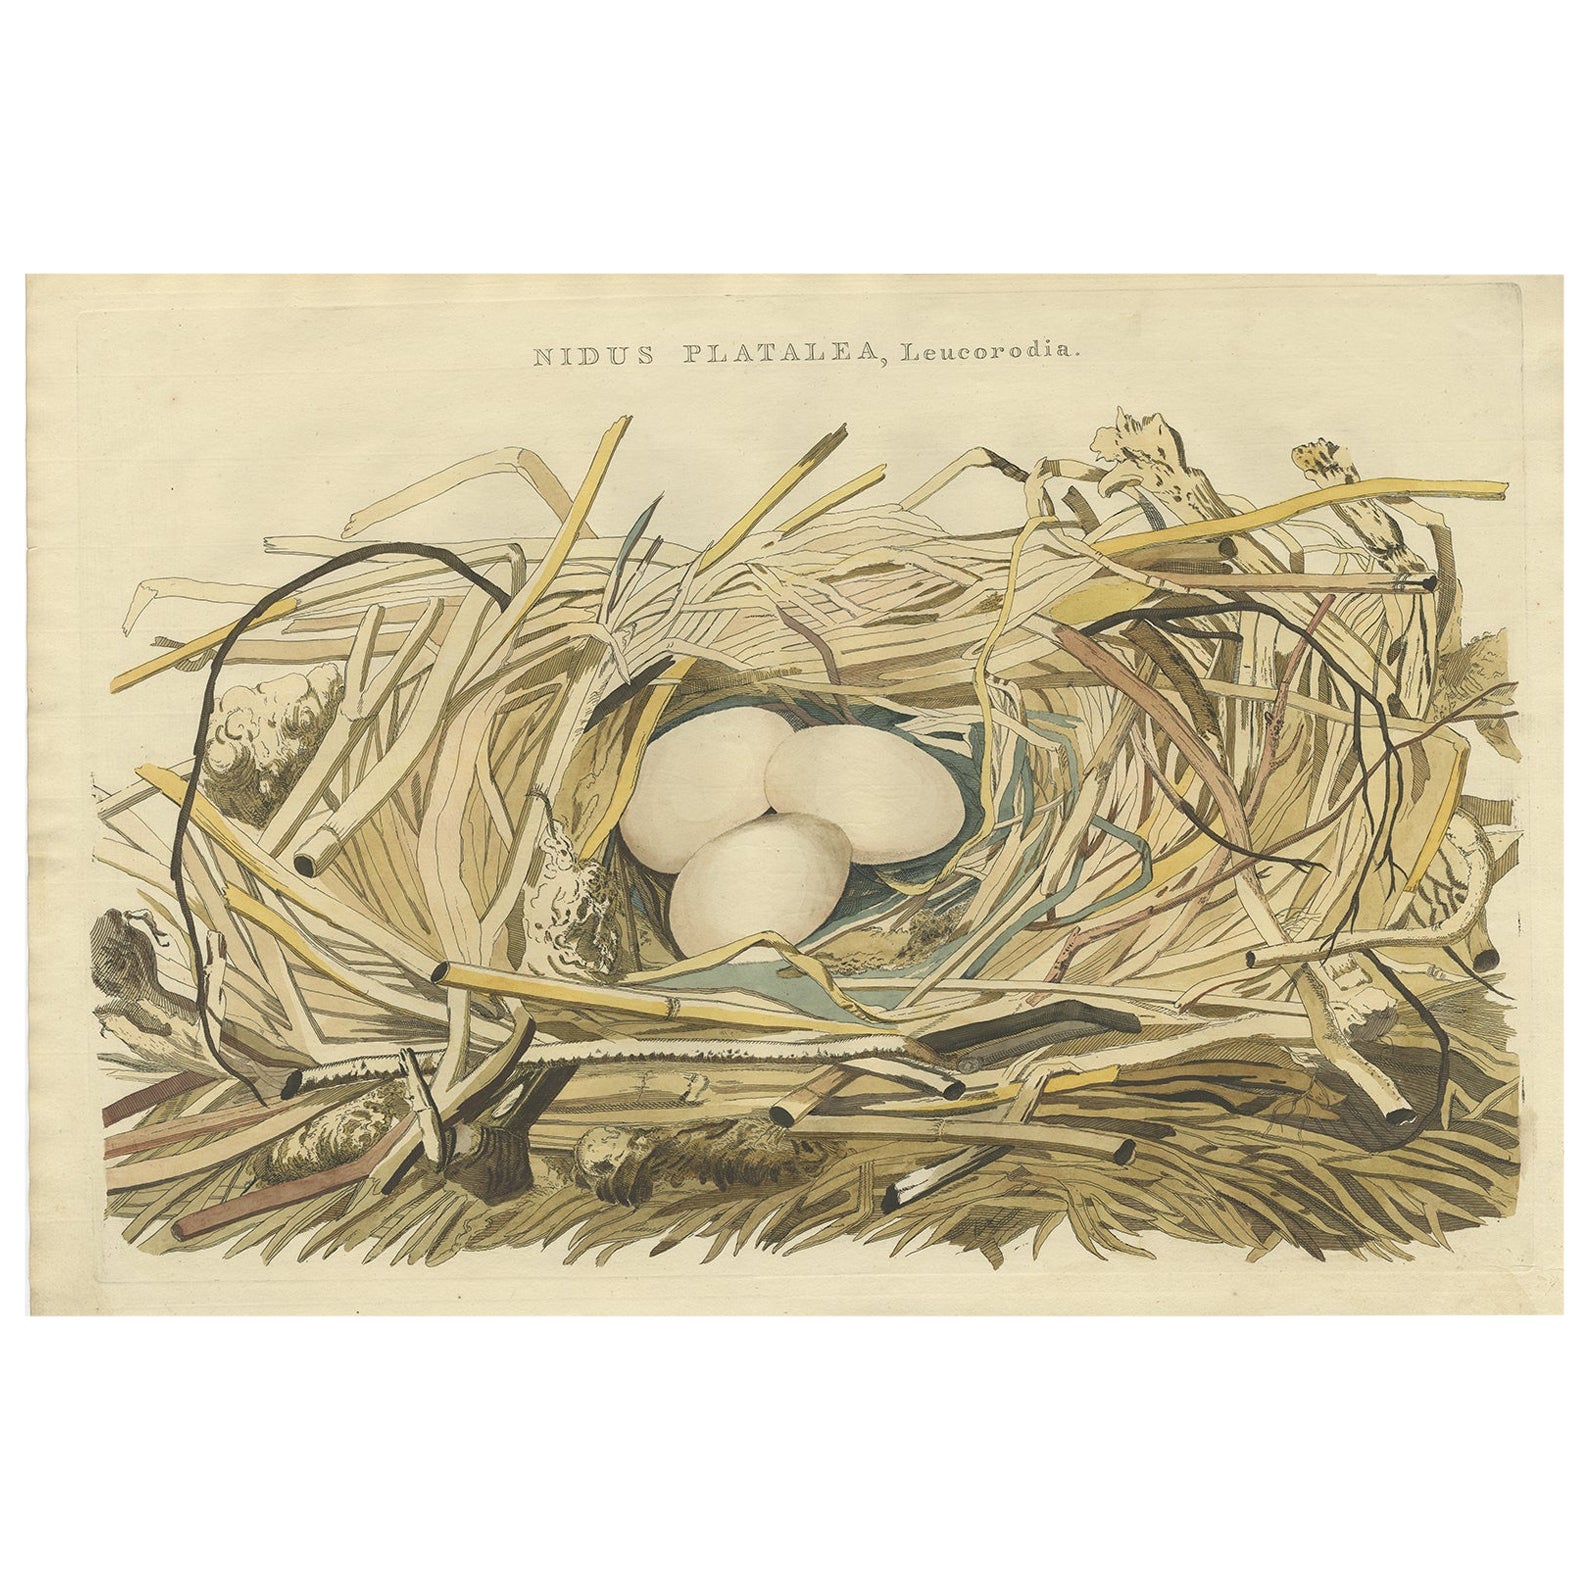 Antique Bird Print of the Nest of a Spoonbill of the Ibis Family, 1789